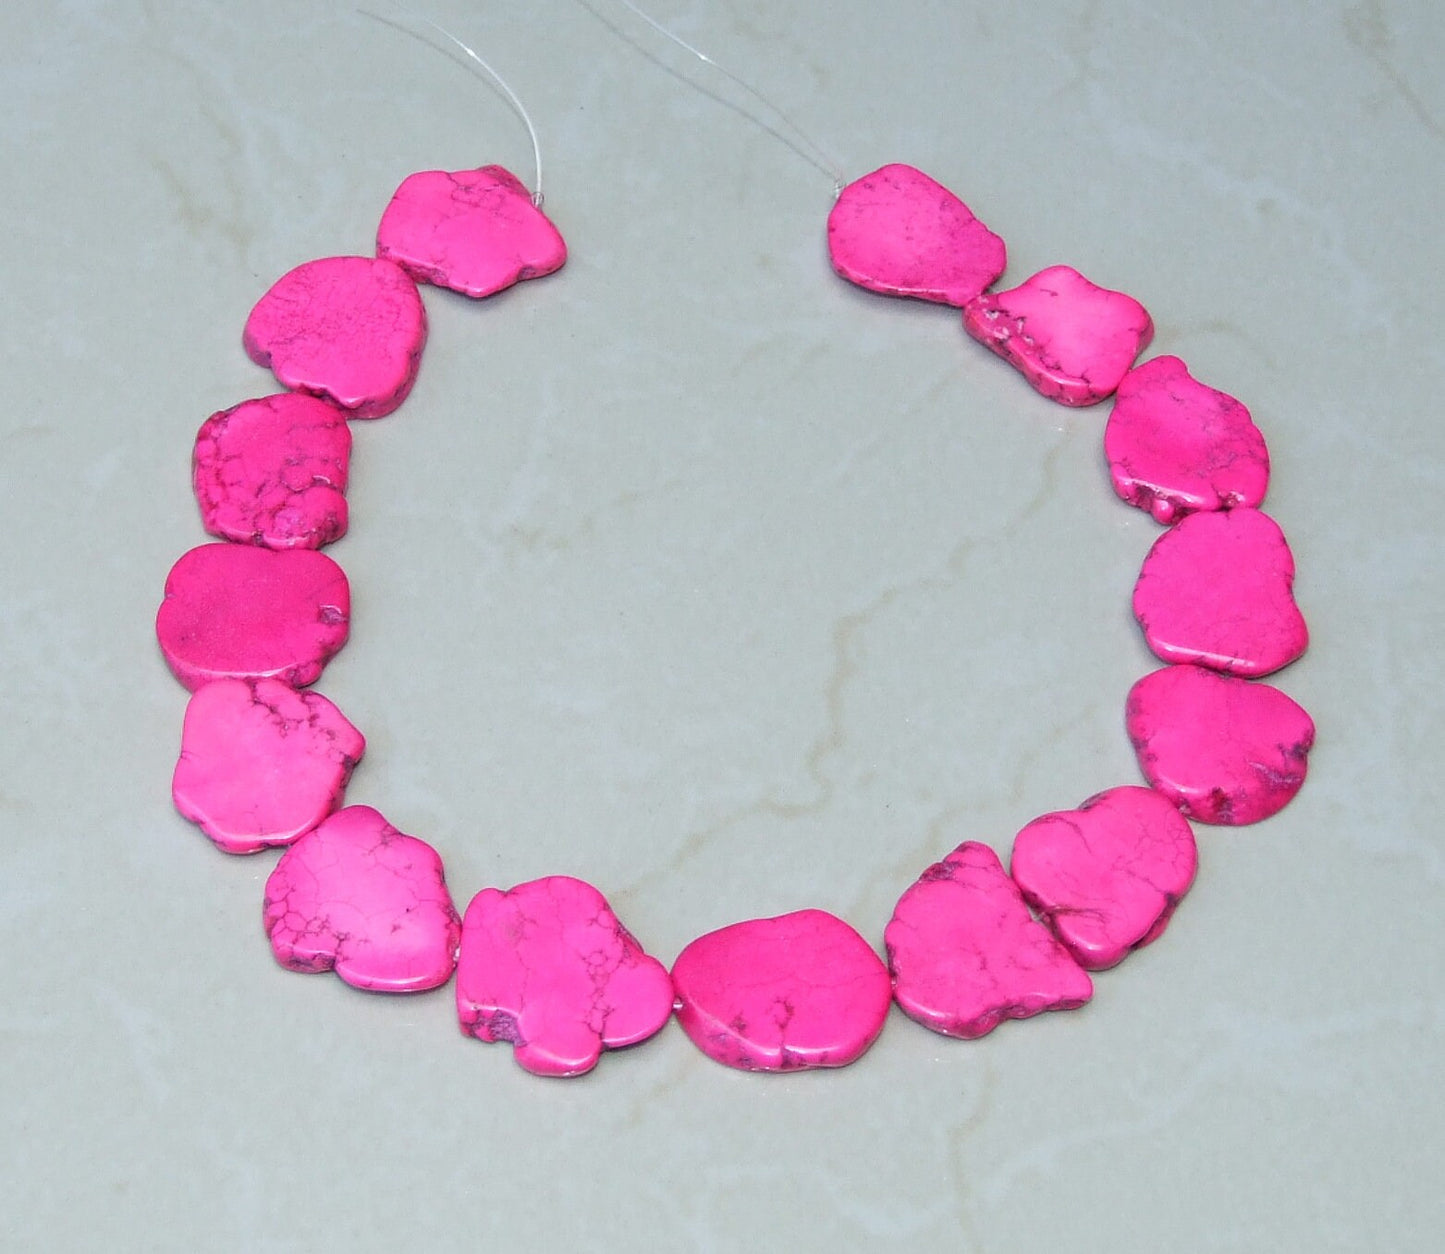 Pink Magnesite Beads, Magnesite Nuggets Beads Slabs, Howlite Beads, Slab Gemstone, Howlite Necklace, Loose Stones, Slabs - 30mm to 40mm